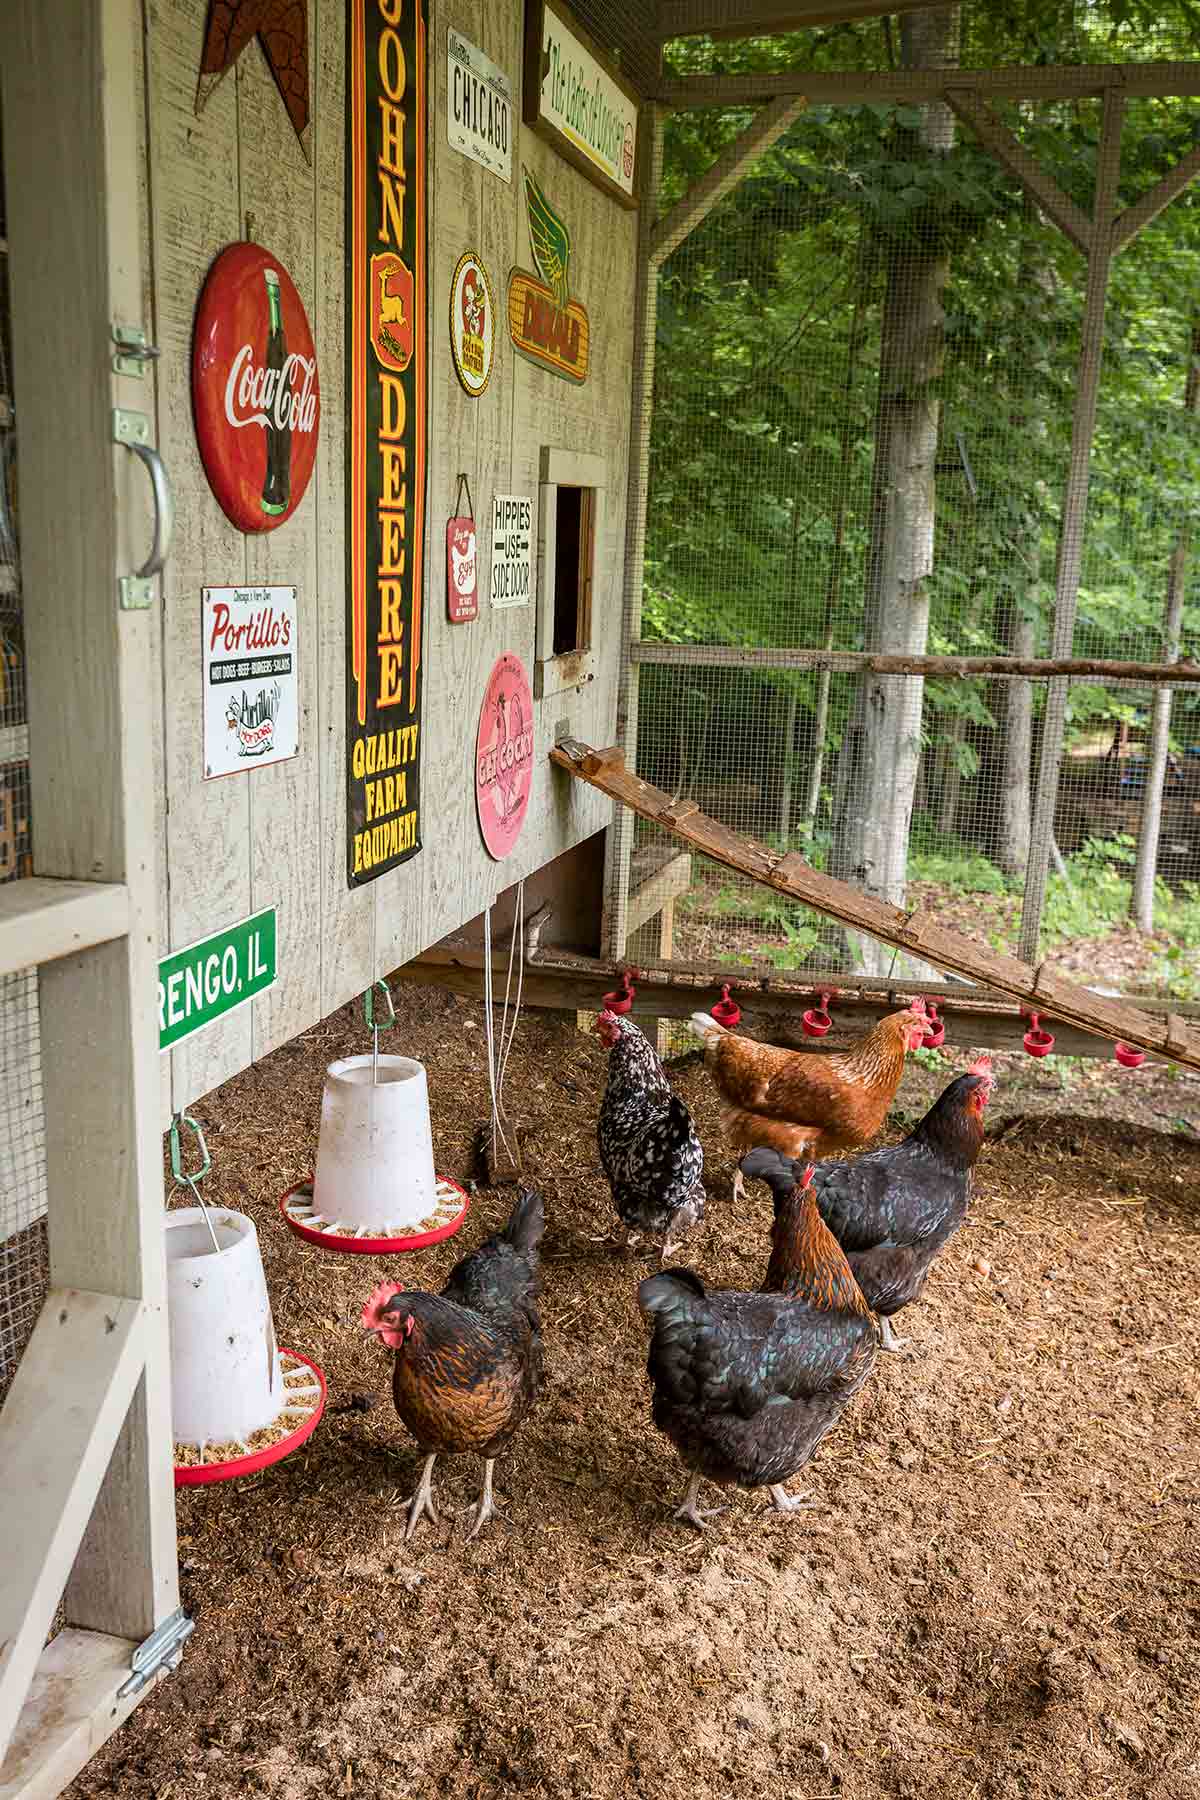 Chickens standing outside a chicken coop